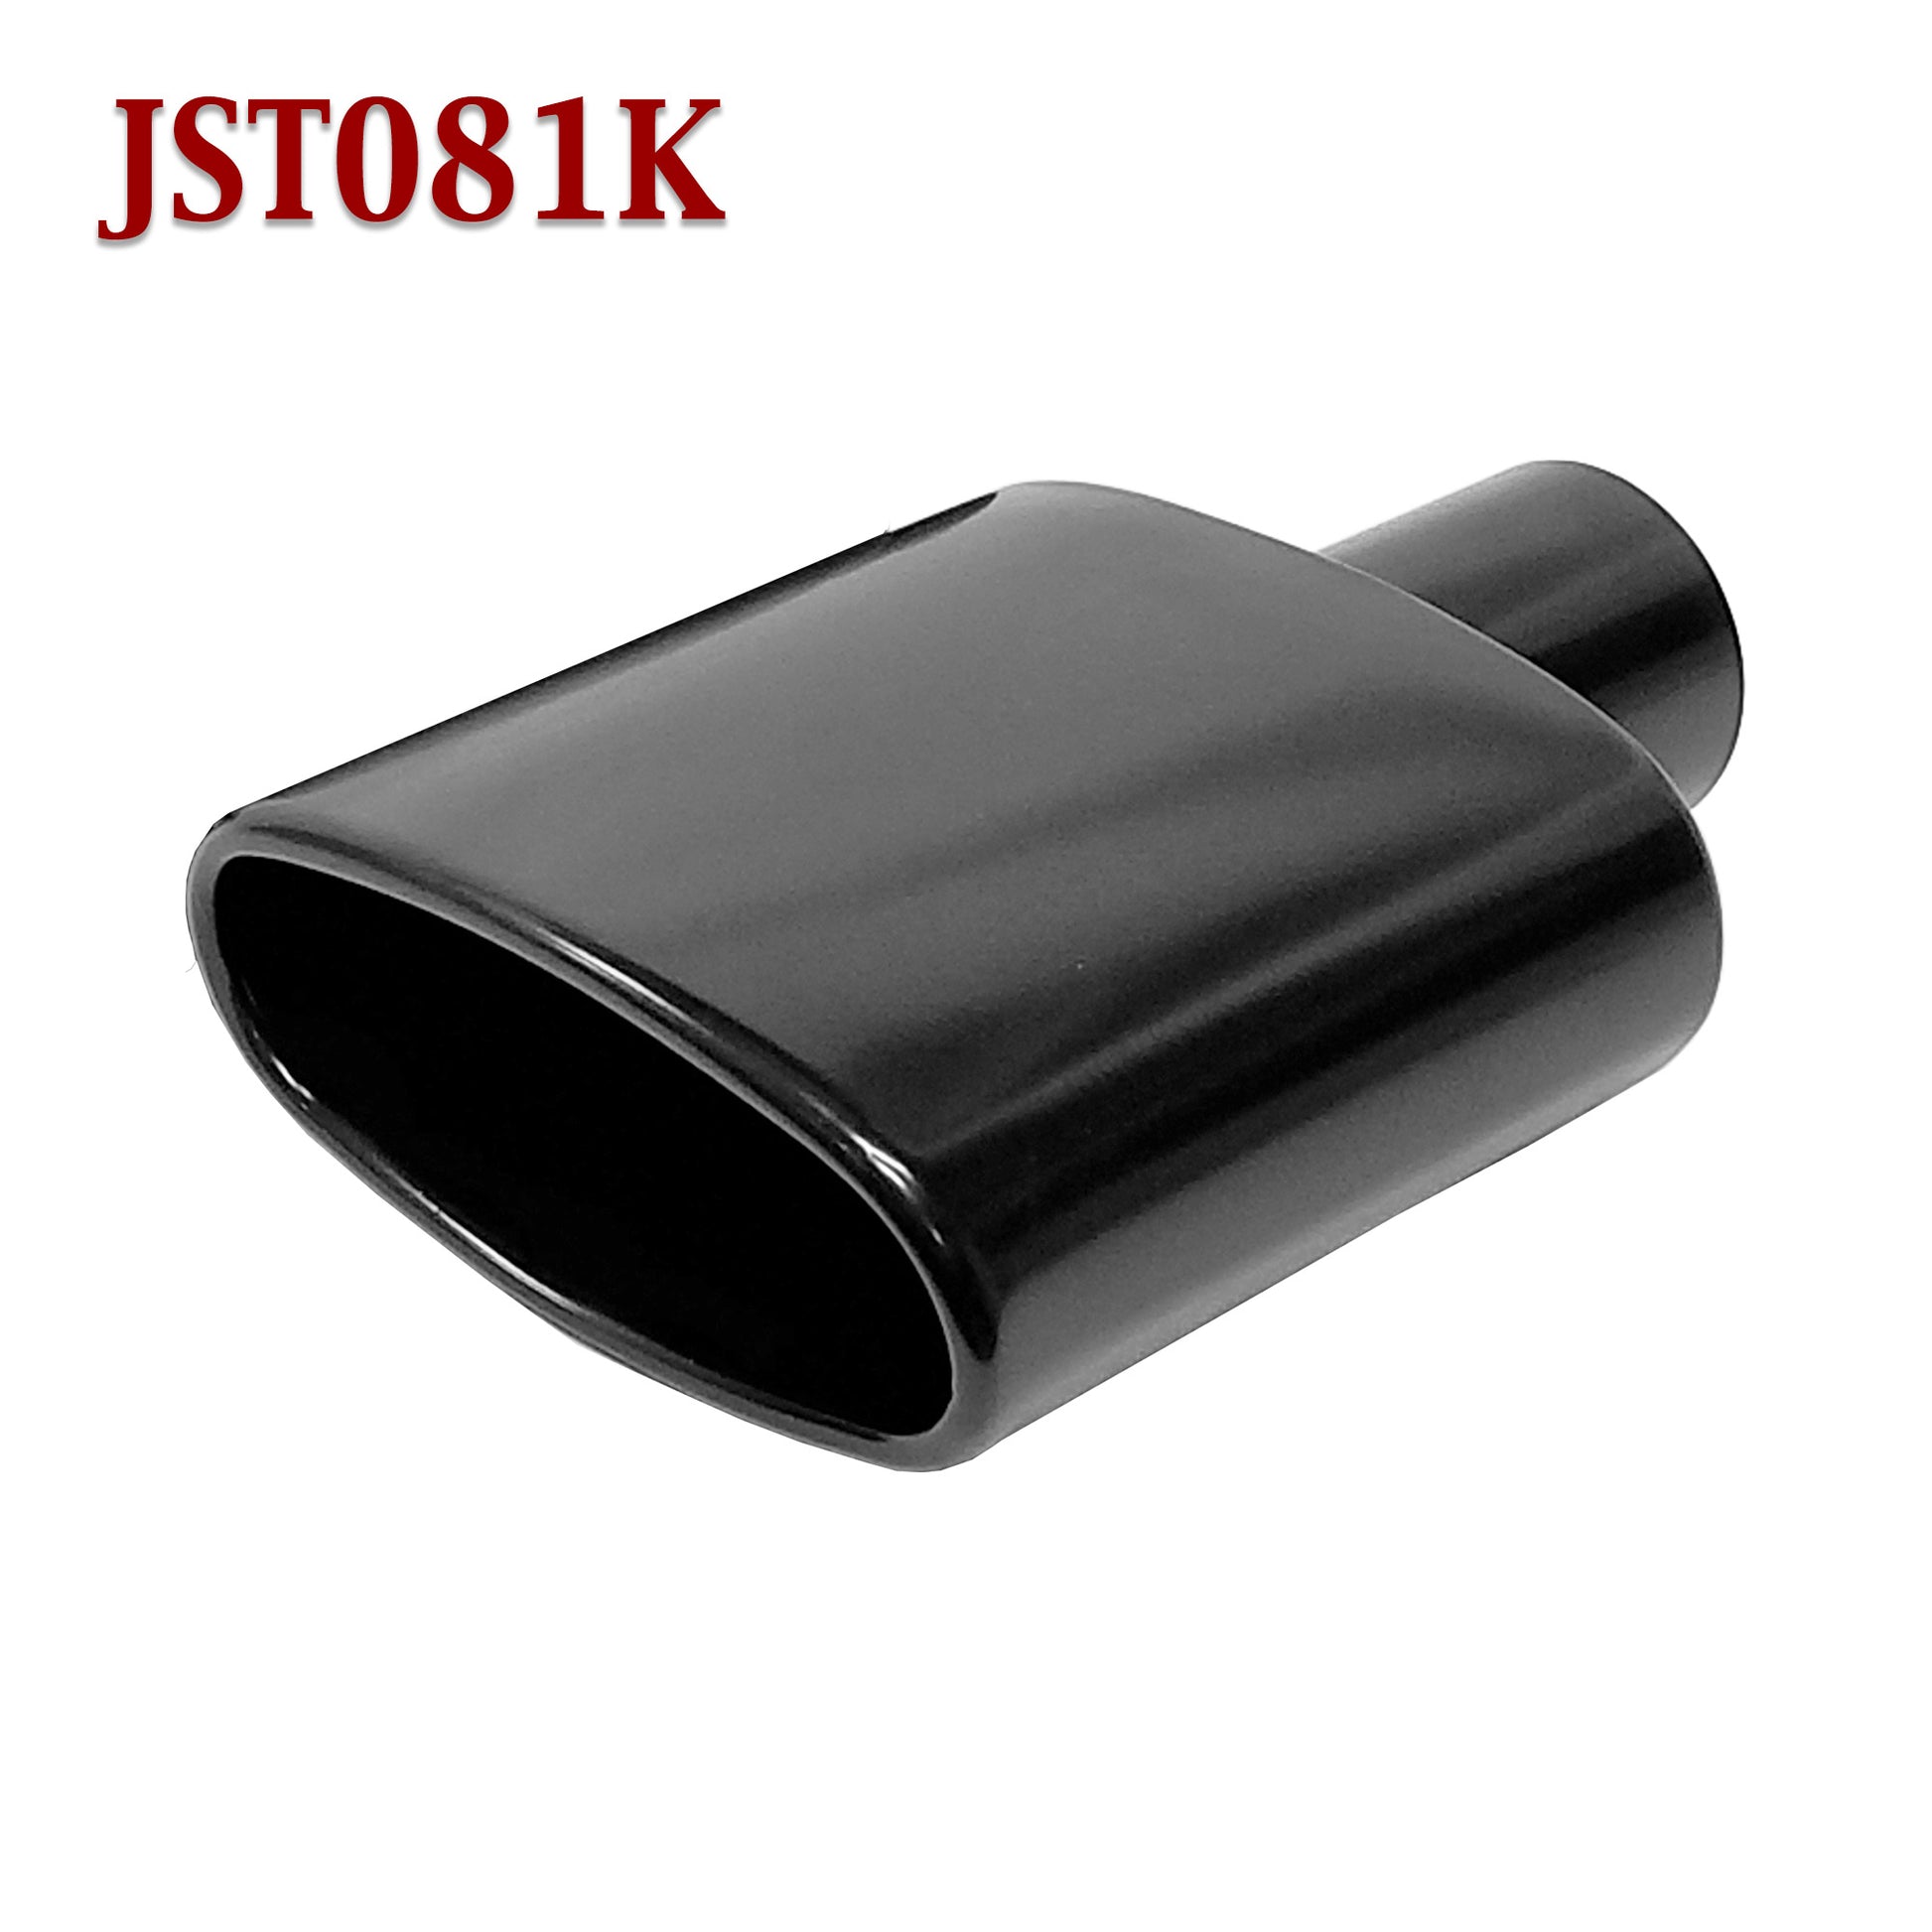 JST081K 2.25 Black Stainless Oval Exhaust Tip 2 1/4 Inlet / 6 x 2 7/8  Outlet / 6 Long